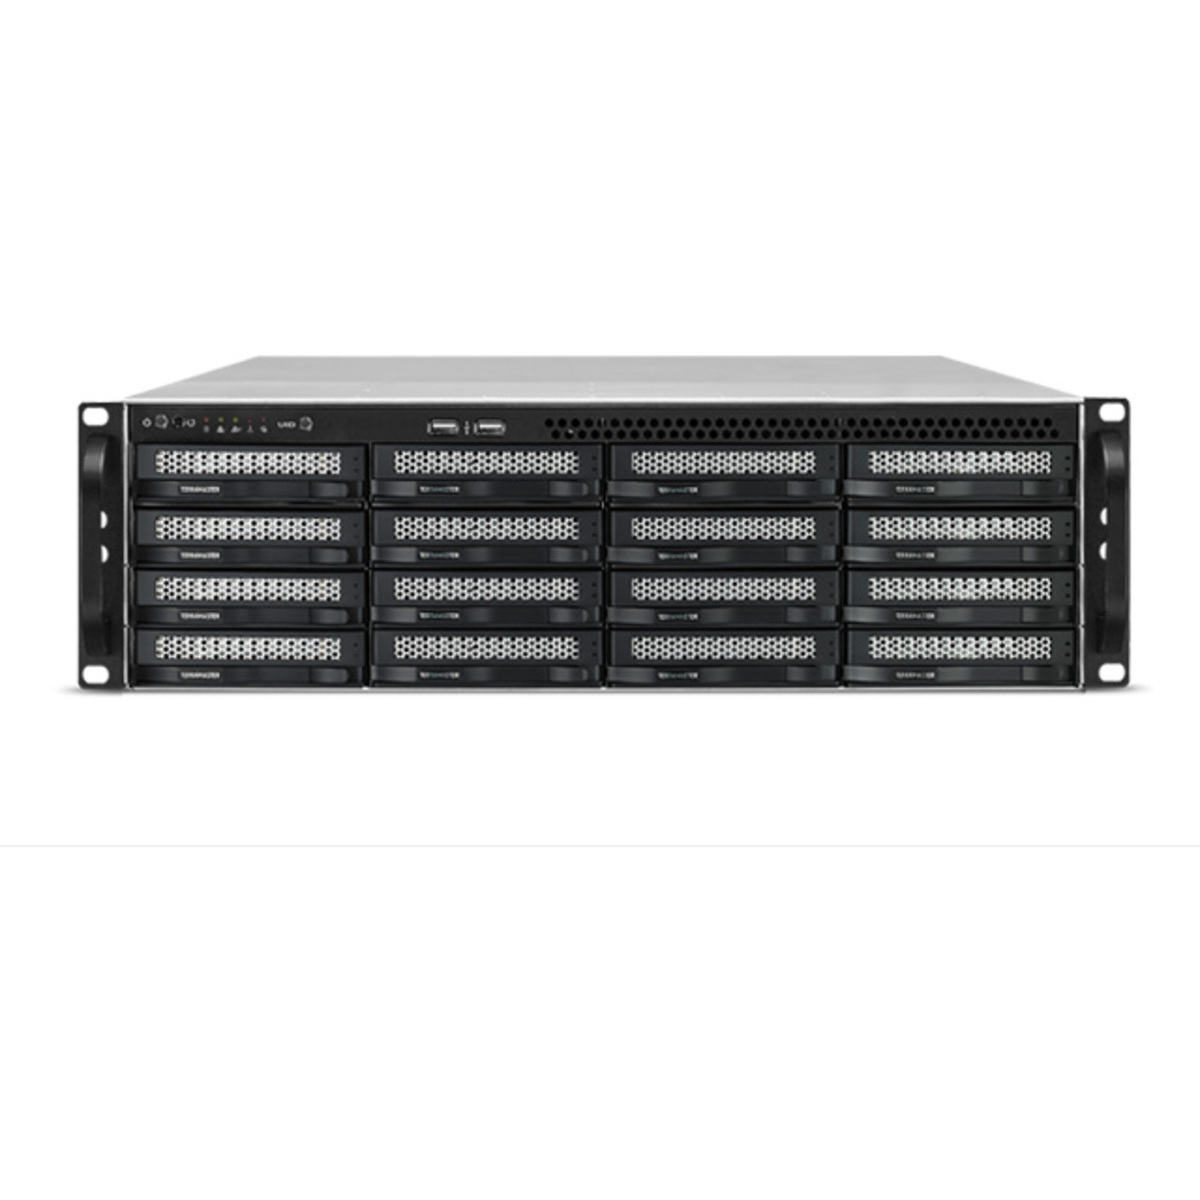 TerraMaster U16-722-2224 11tb 16-Bay RackMount Large Business / Enterprise NAS - Network Attached Storage Device 11x1tb Western Digital Red SA500 WDS100T1R0A 2.5 560/530MB/s SATA 6Gb/s SSD NAS Class Drives Installed - Burn-In Tested U16-722-2224